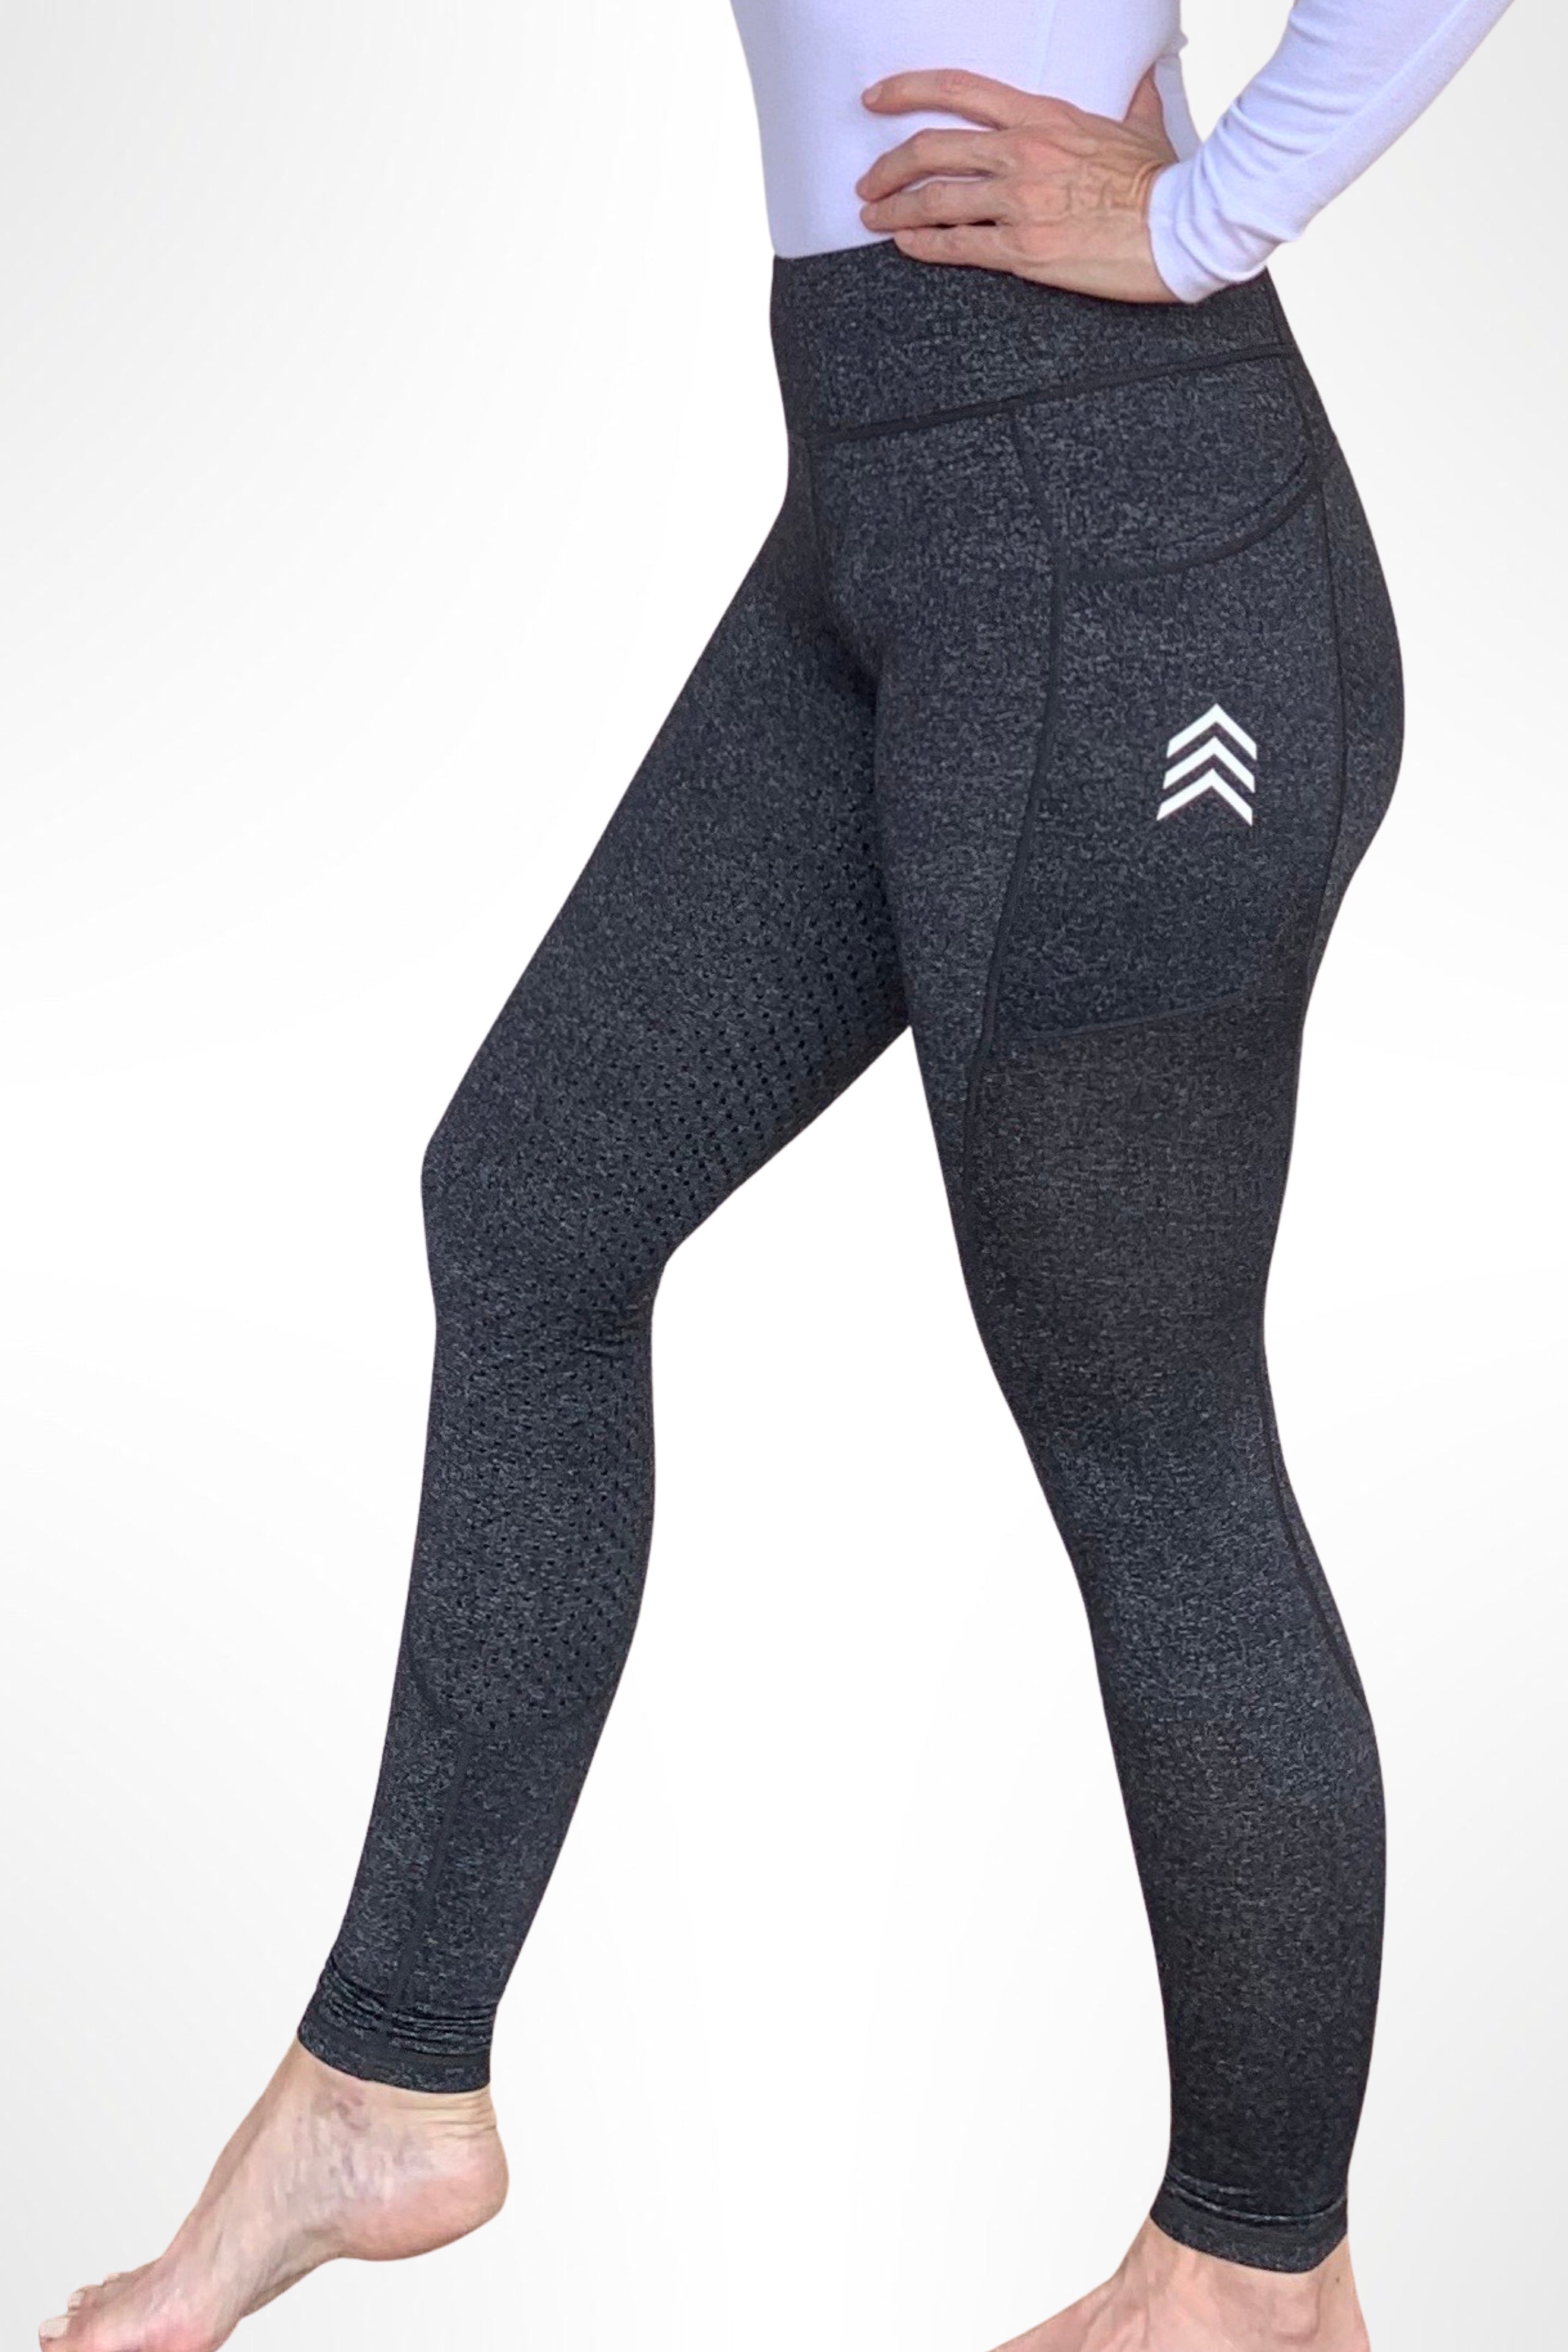 NOMAD ATHLETIC RIDING TIGHTS - MARLE GREY